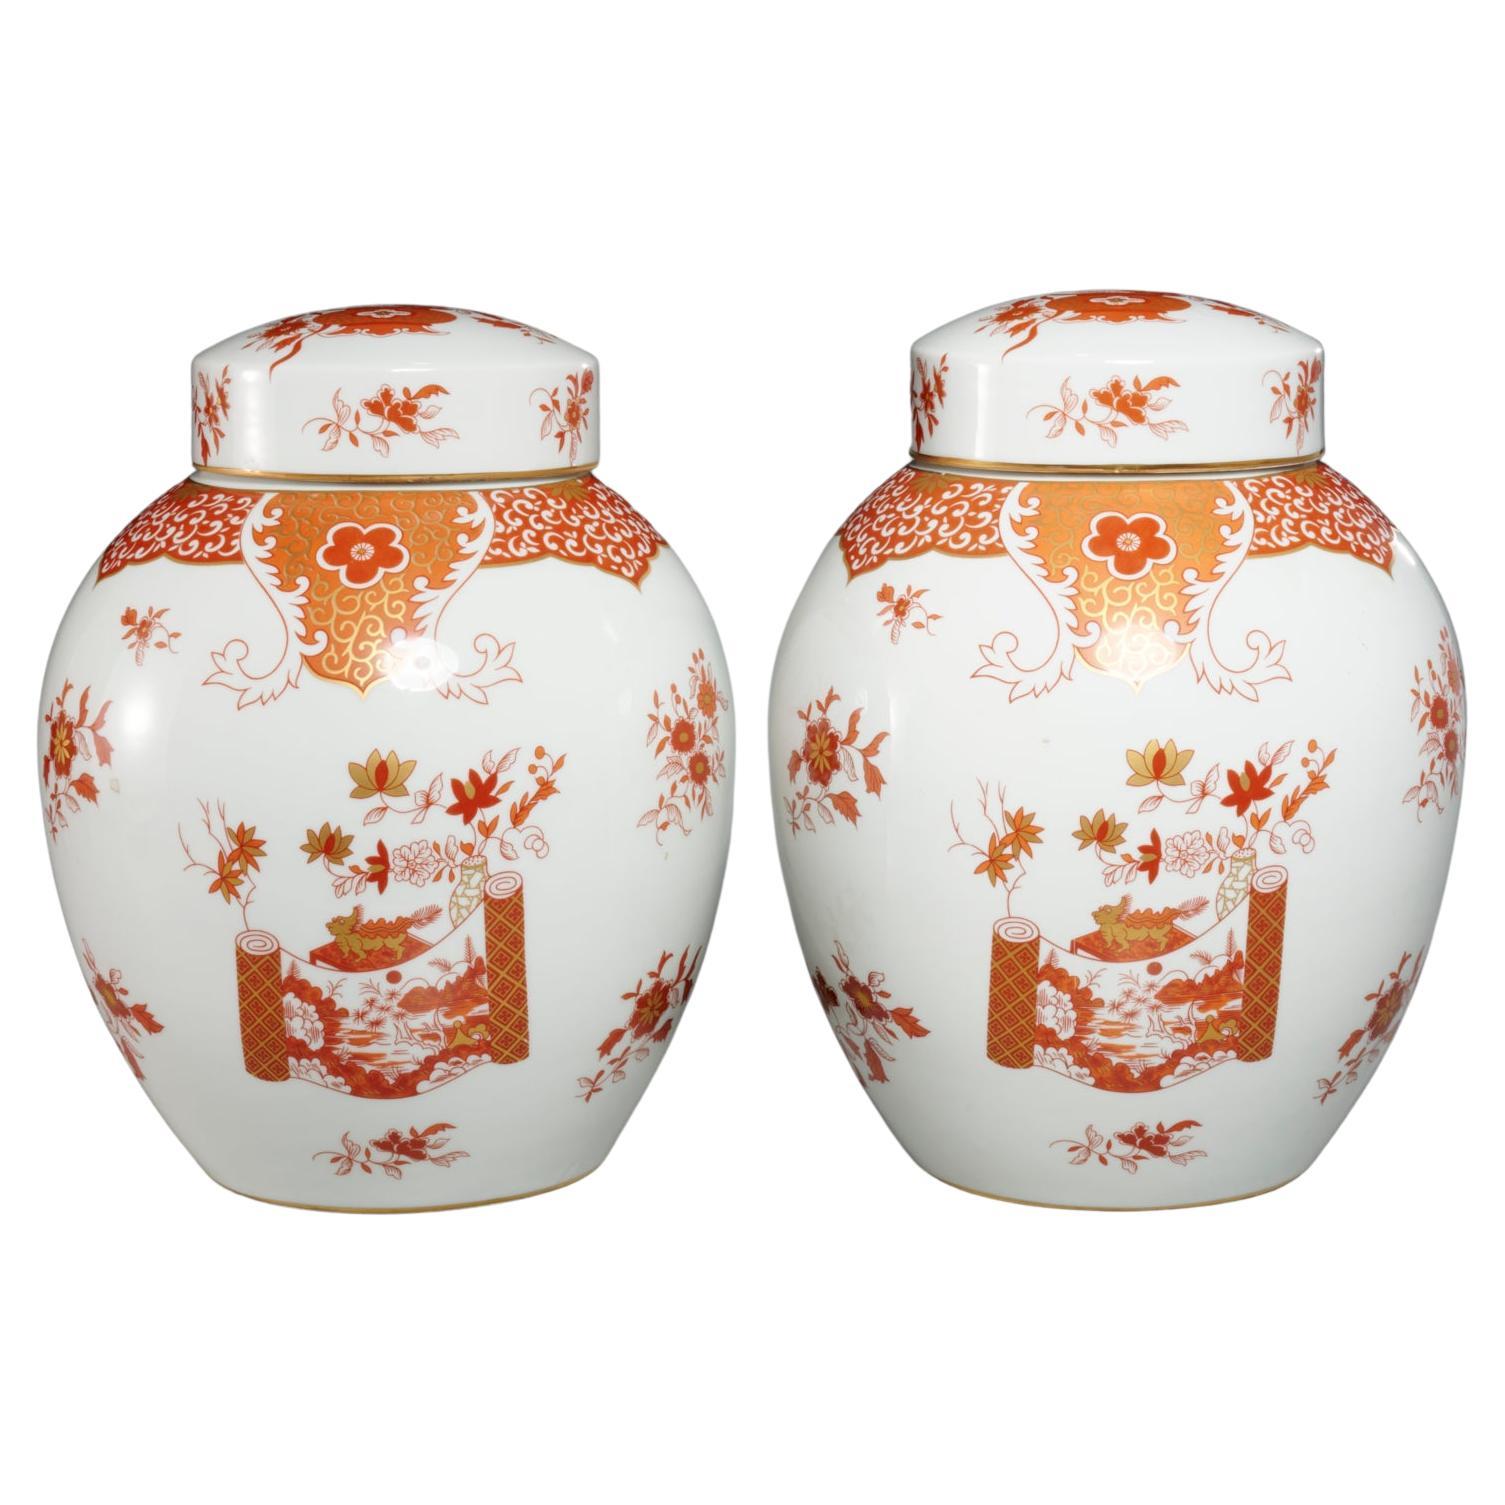 Mid 20th C. Kutani Style French Porcelain Lidded Ginger Jars  - A Pair For Sale